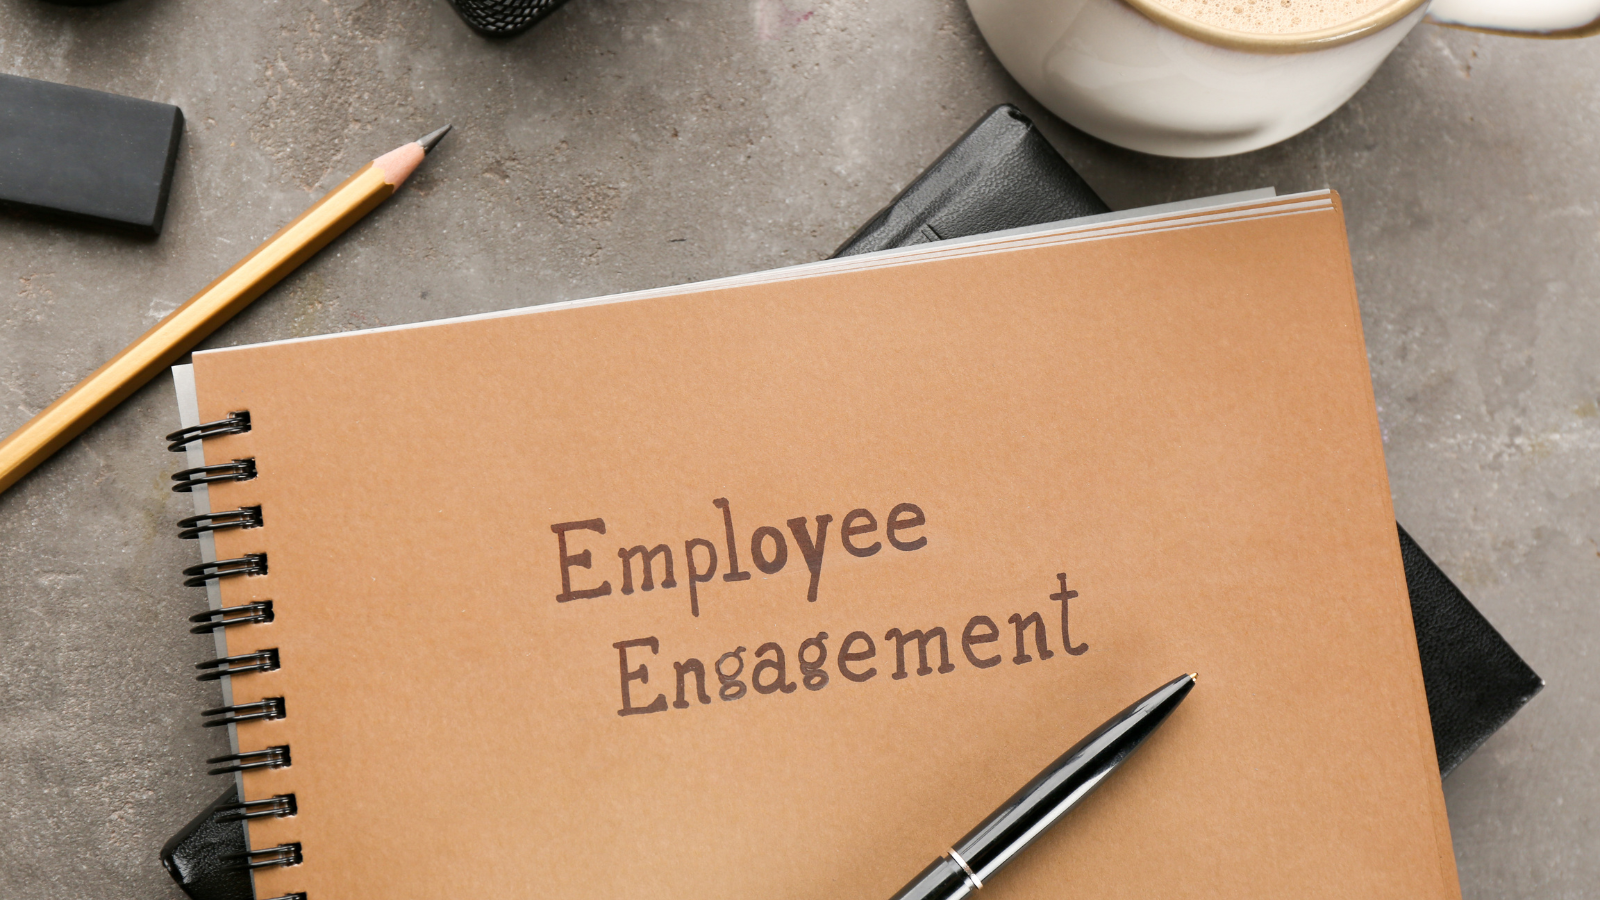 how the employee engagement can benefit the company